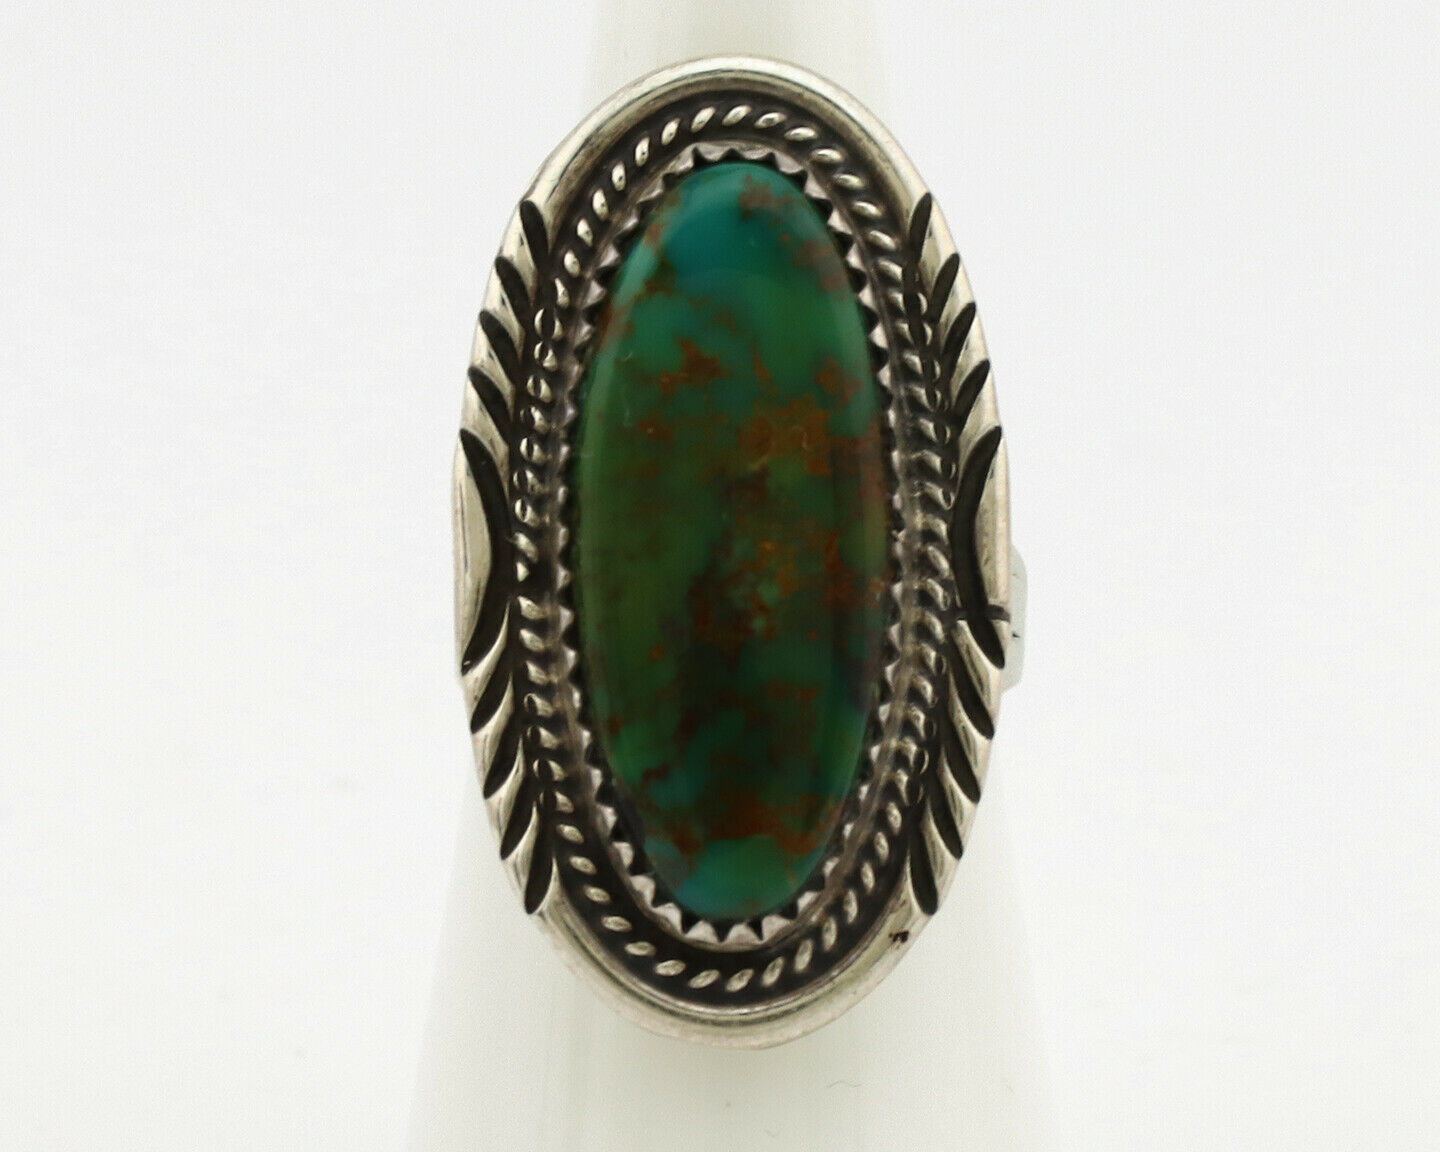 Navajo Ring .925 Silver Nevada Turquoise Artist Signed M Begay C.1980's